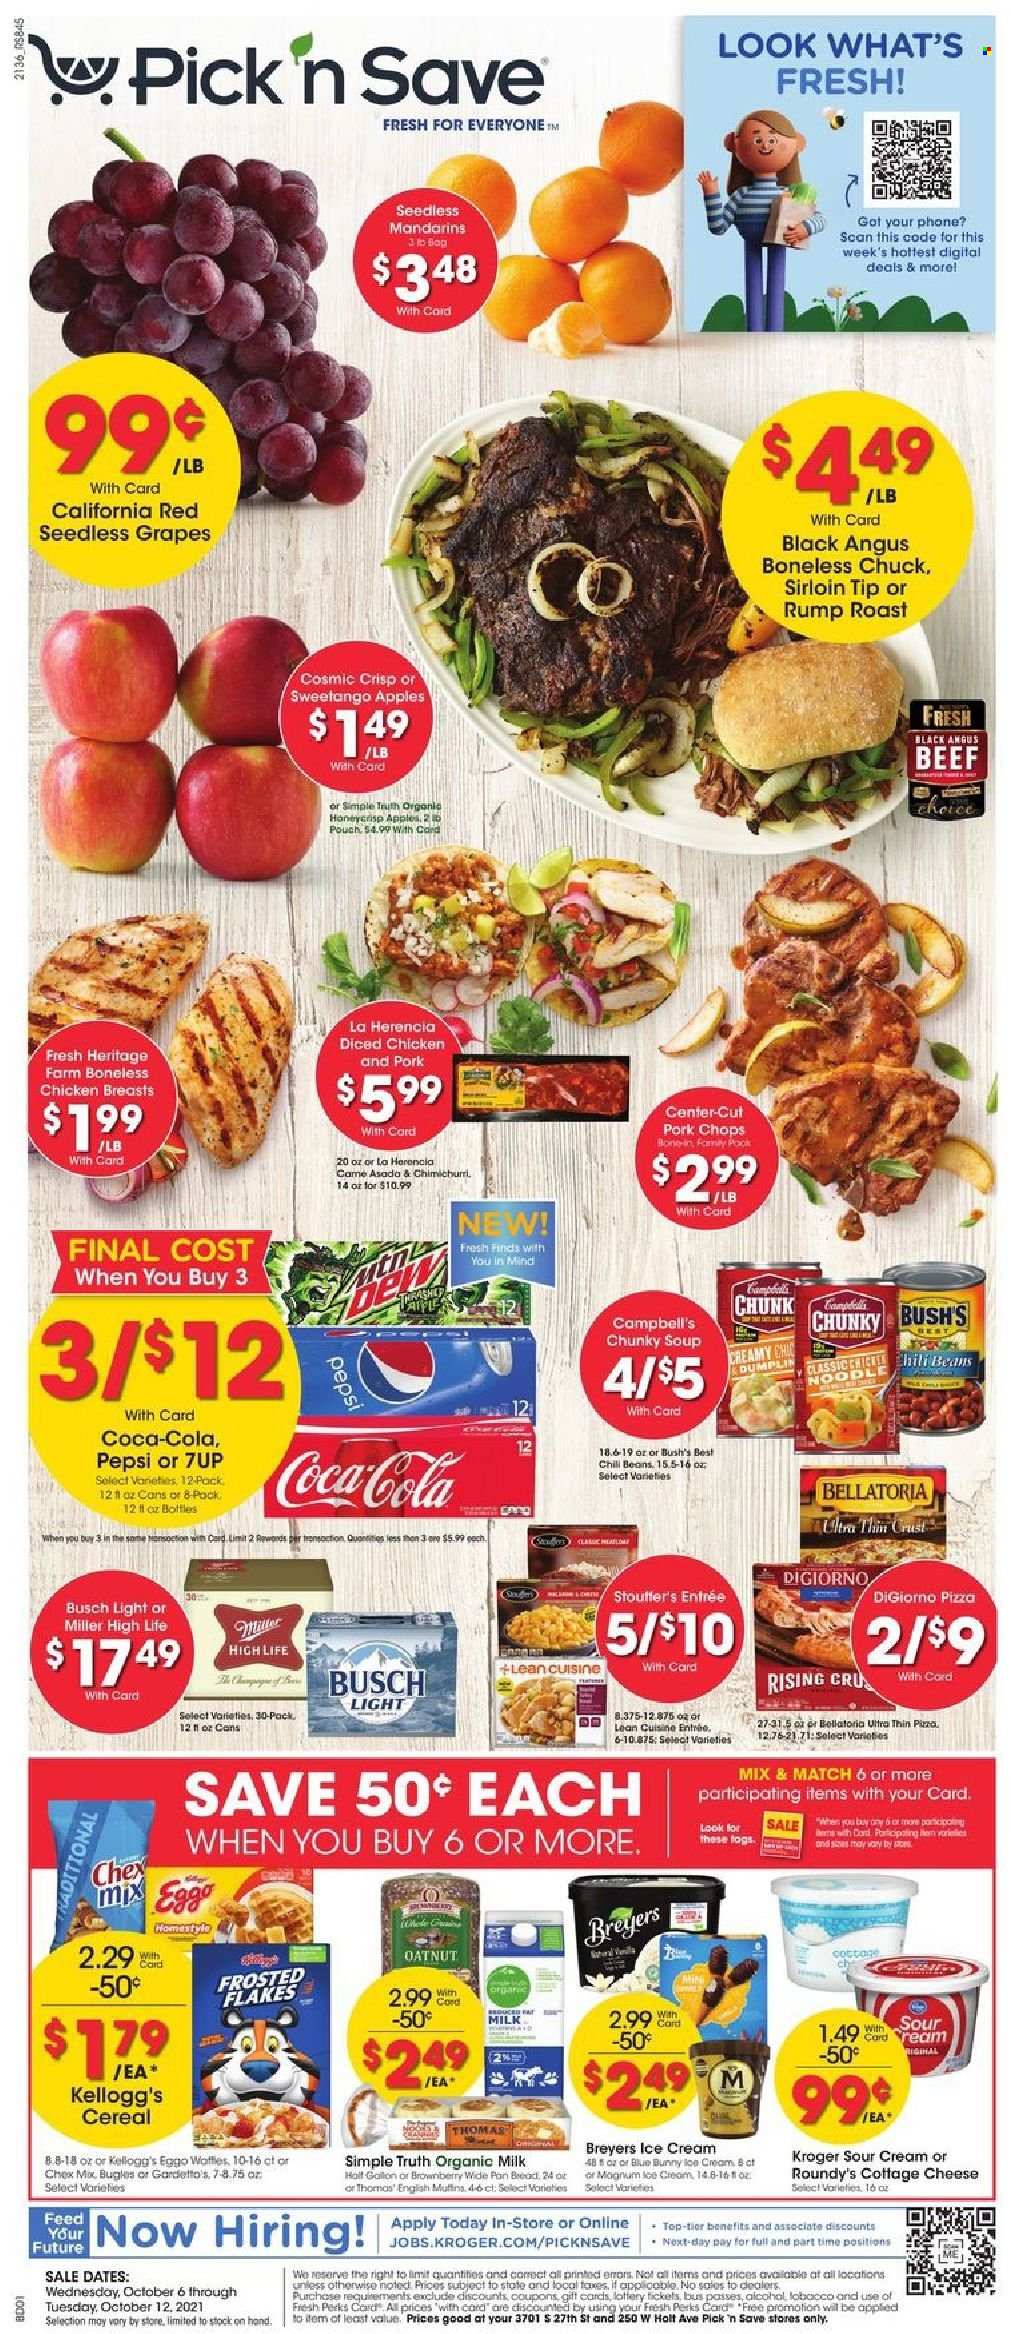 thumbnail - Pick ‘n Save Flyer - 10/06/2021 - 10/12/2021 - Sales products - seedless grapes, beans, apples, grapes, mandarines, Campbell's, pizza, soup, cottage cheese, organic milk, sour cream, ice cream, Blue Bunny, Stouffer's, Bellatoria, Kellogg's, chili beans, cereals, Frosted Flakes, Coca-Cola, Pepsi, 7UP, alcohol, beer, Busch, Miller, chicken breasts, beef meat, pork chops, pork meat, pan. Page 1.